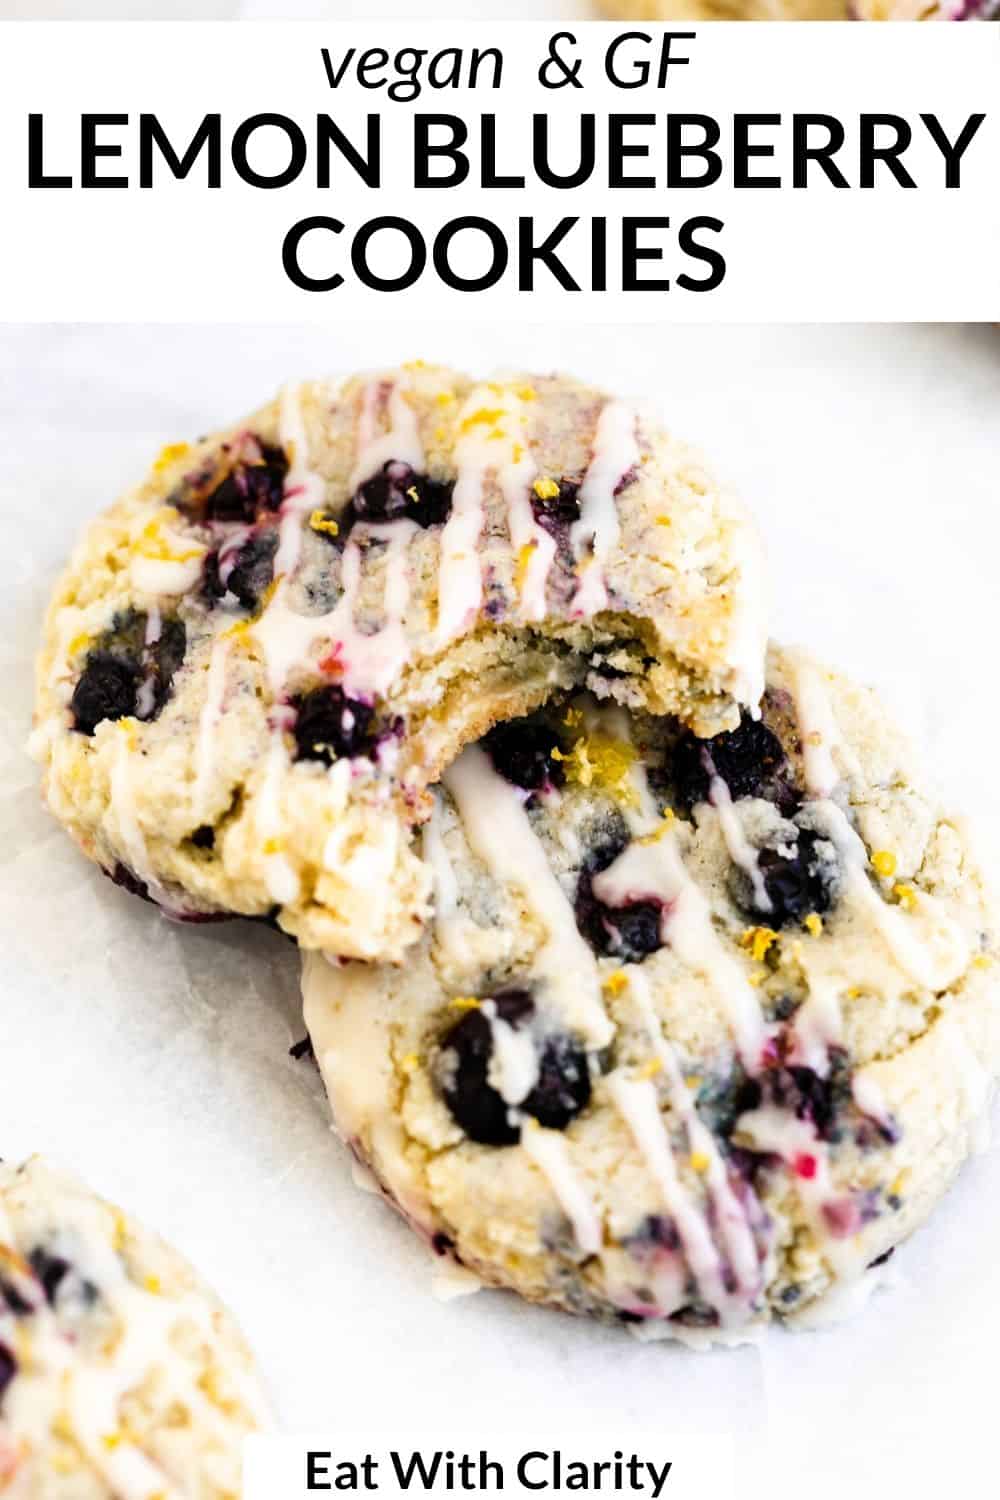 Chewy Vegan Lemon Blueberry Cookies | Eat With Clarity